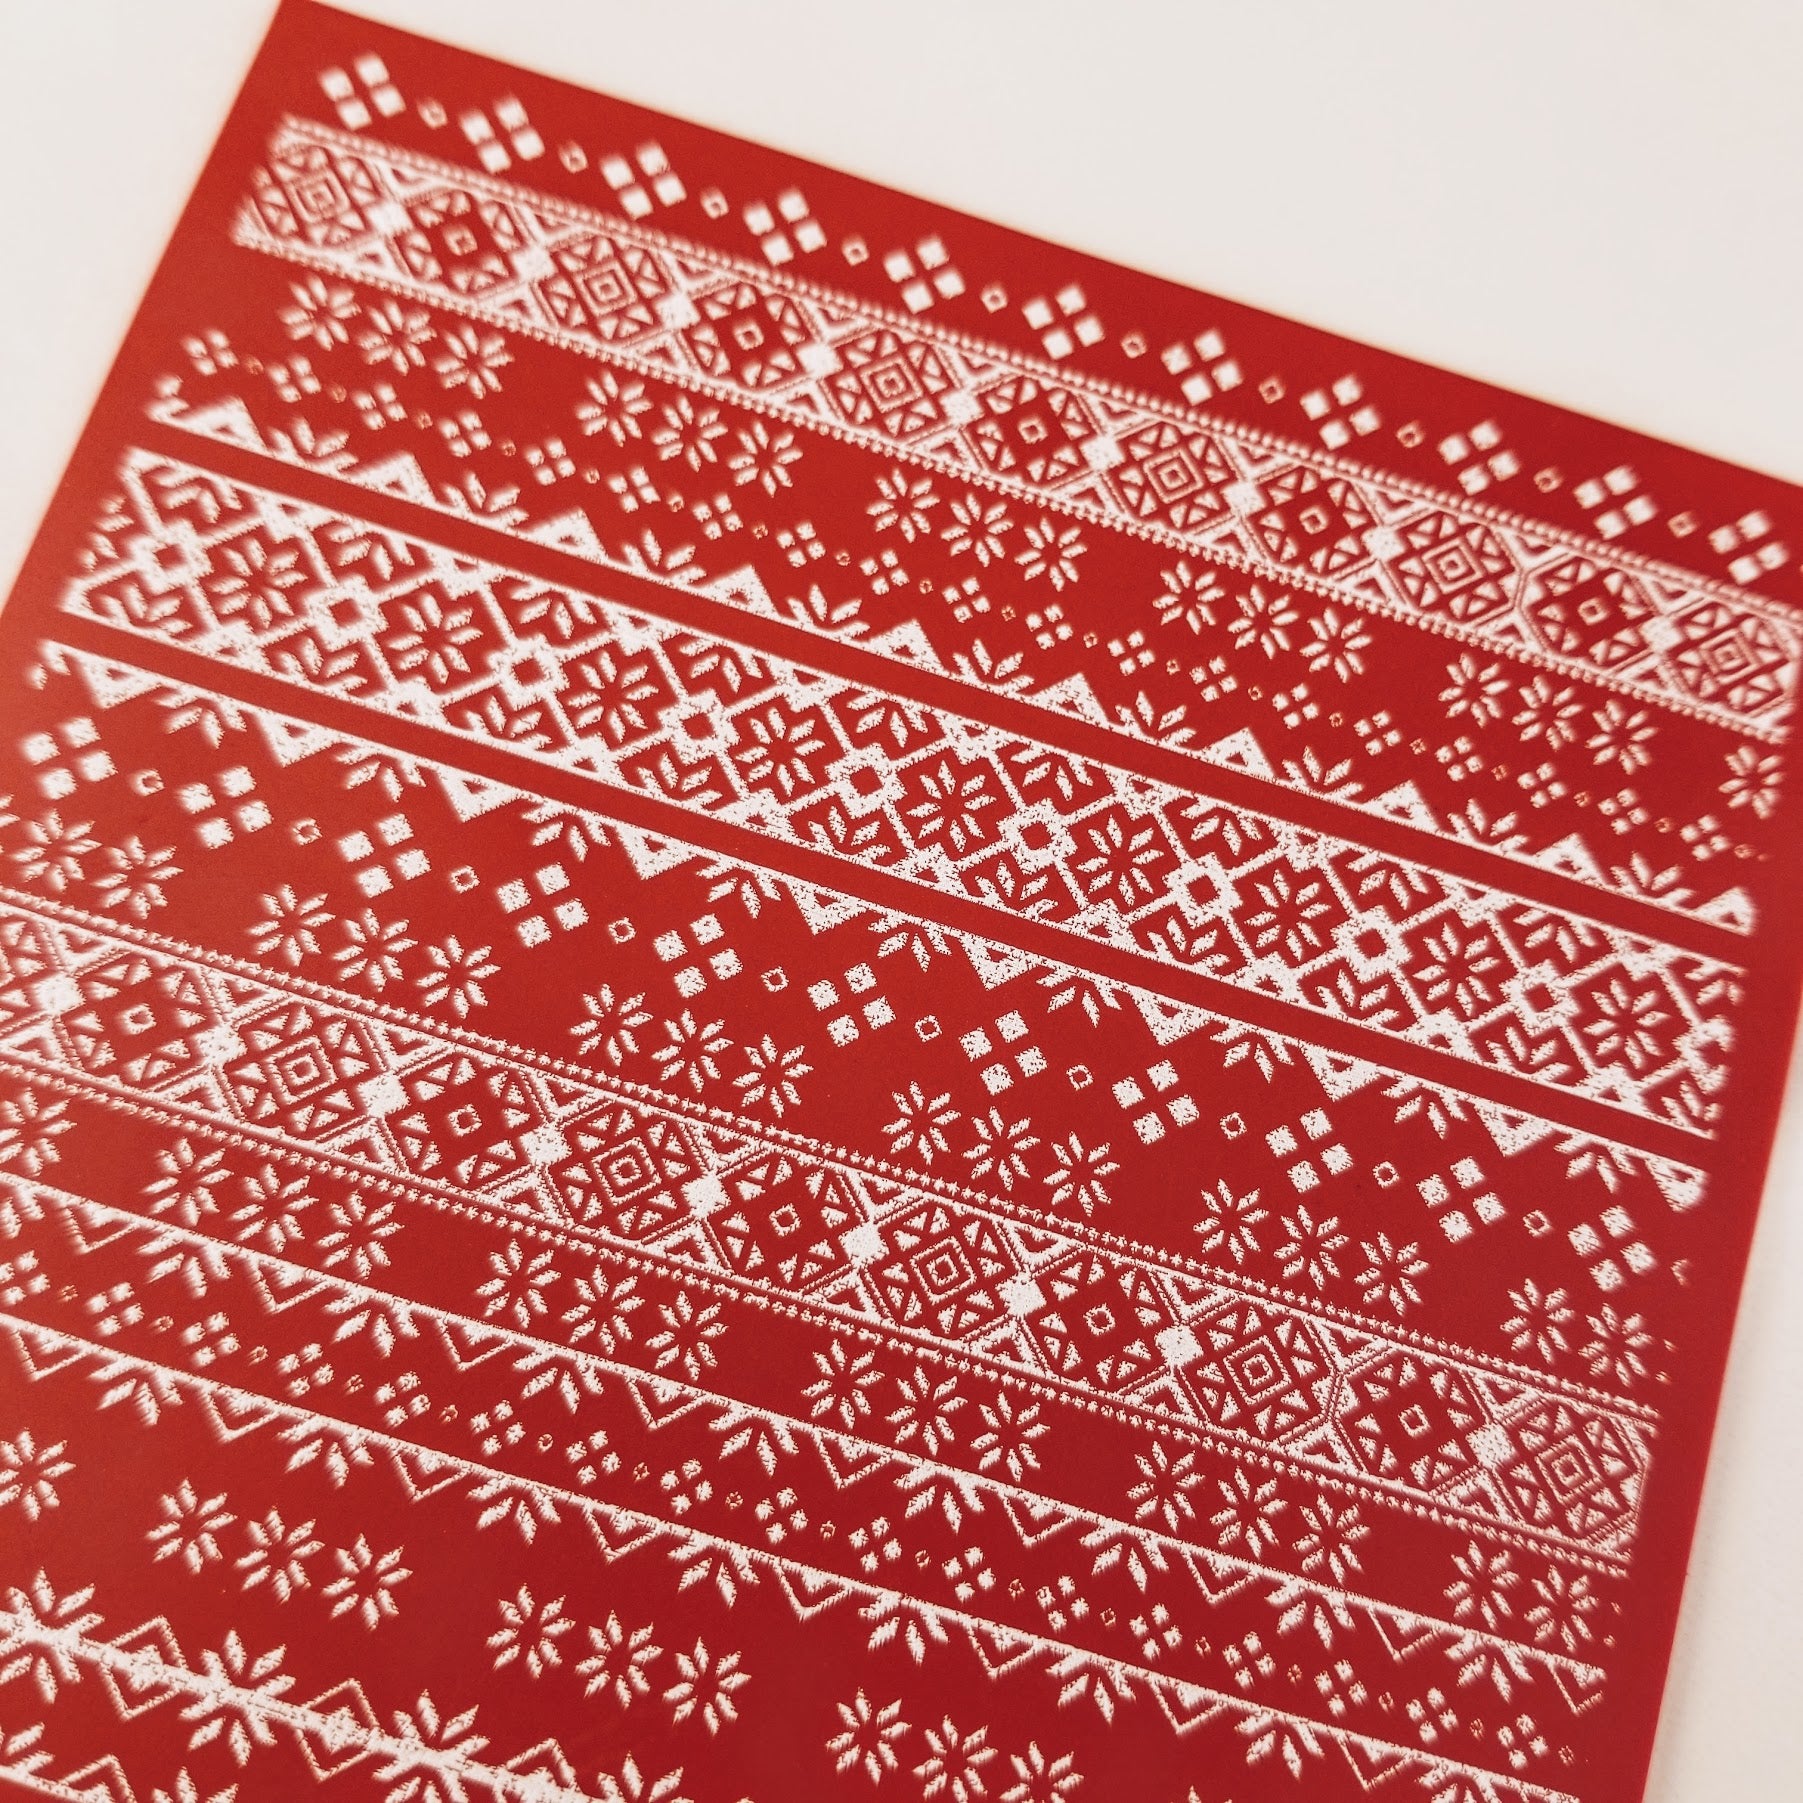 Winter Christmas Holiday Knit Silkscreen Stencil Details for Polymer Clay Painting Tools and Supplies